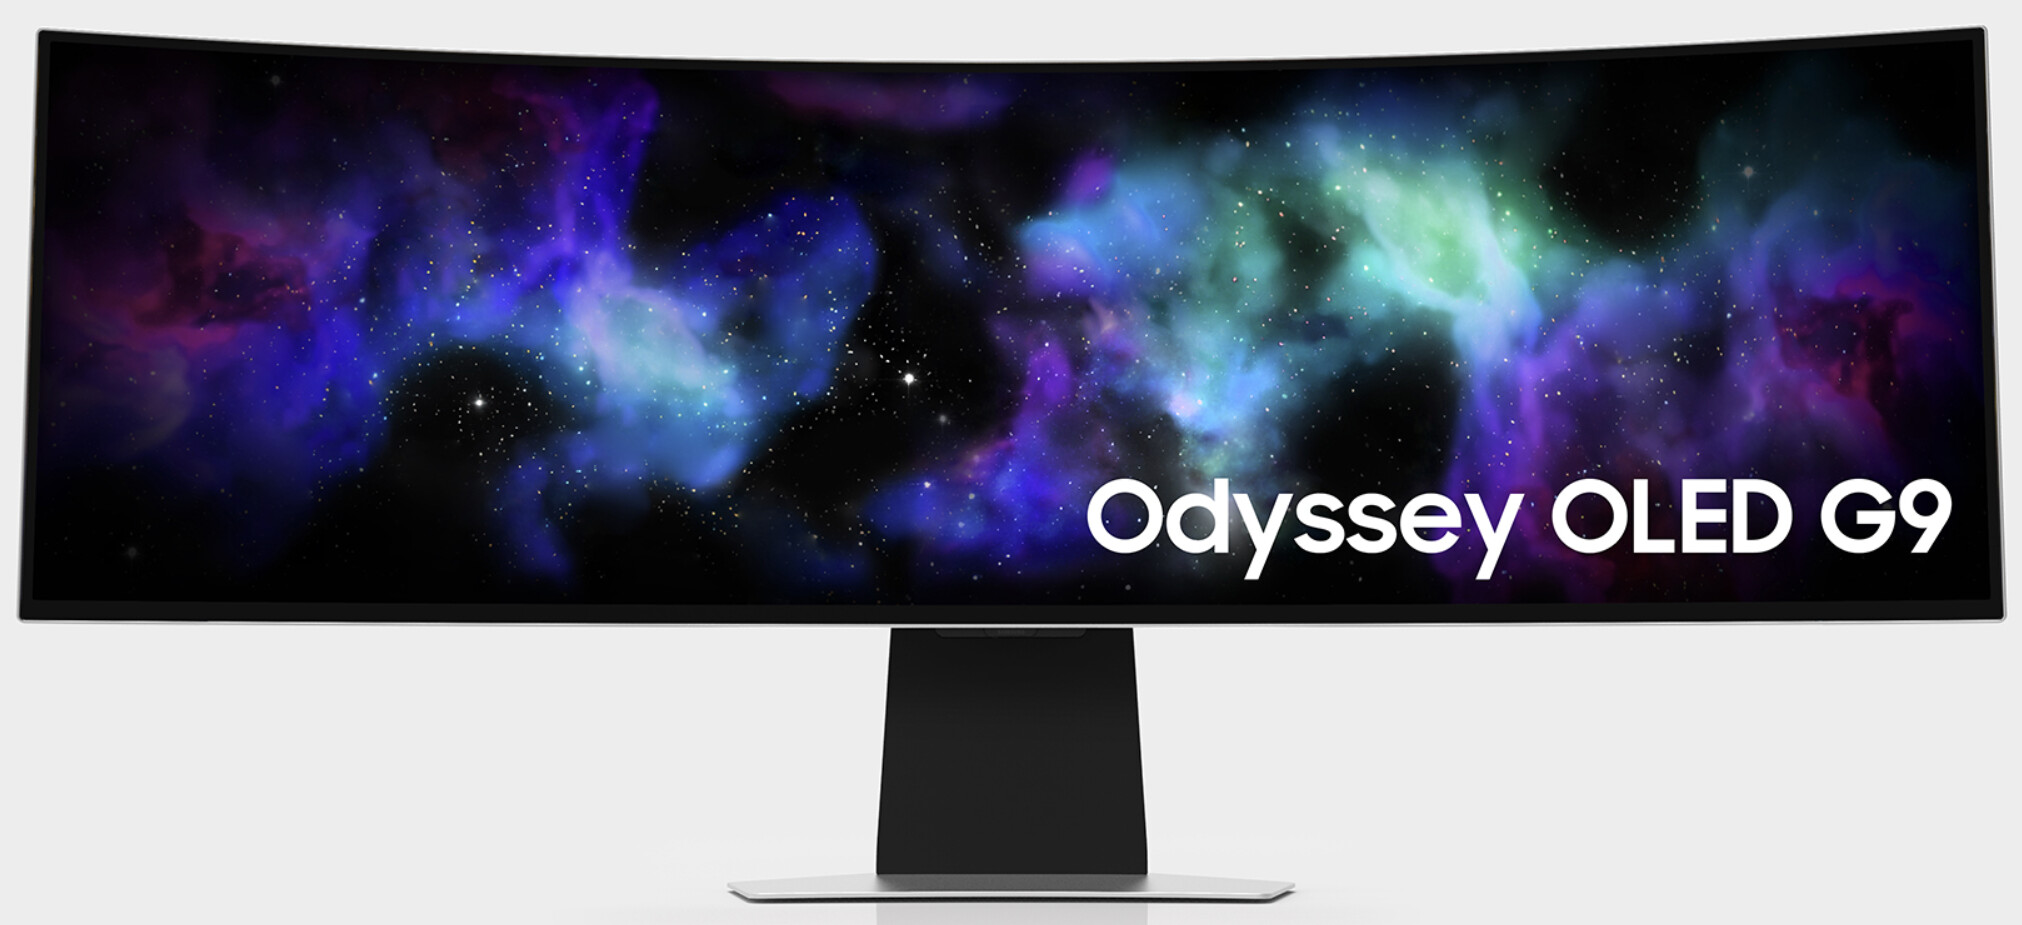 Samsung launches Odyssey G5 series gaming monitors